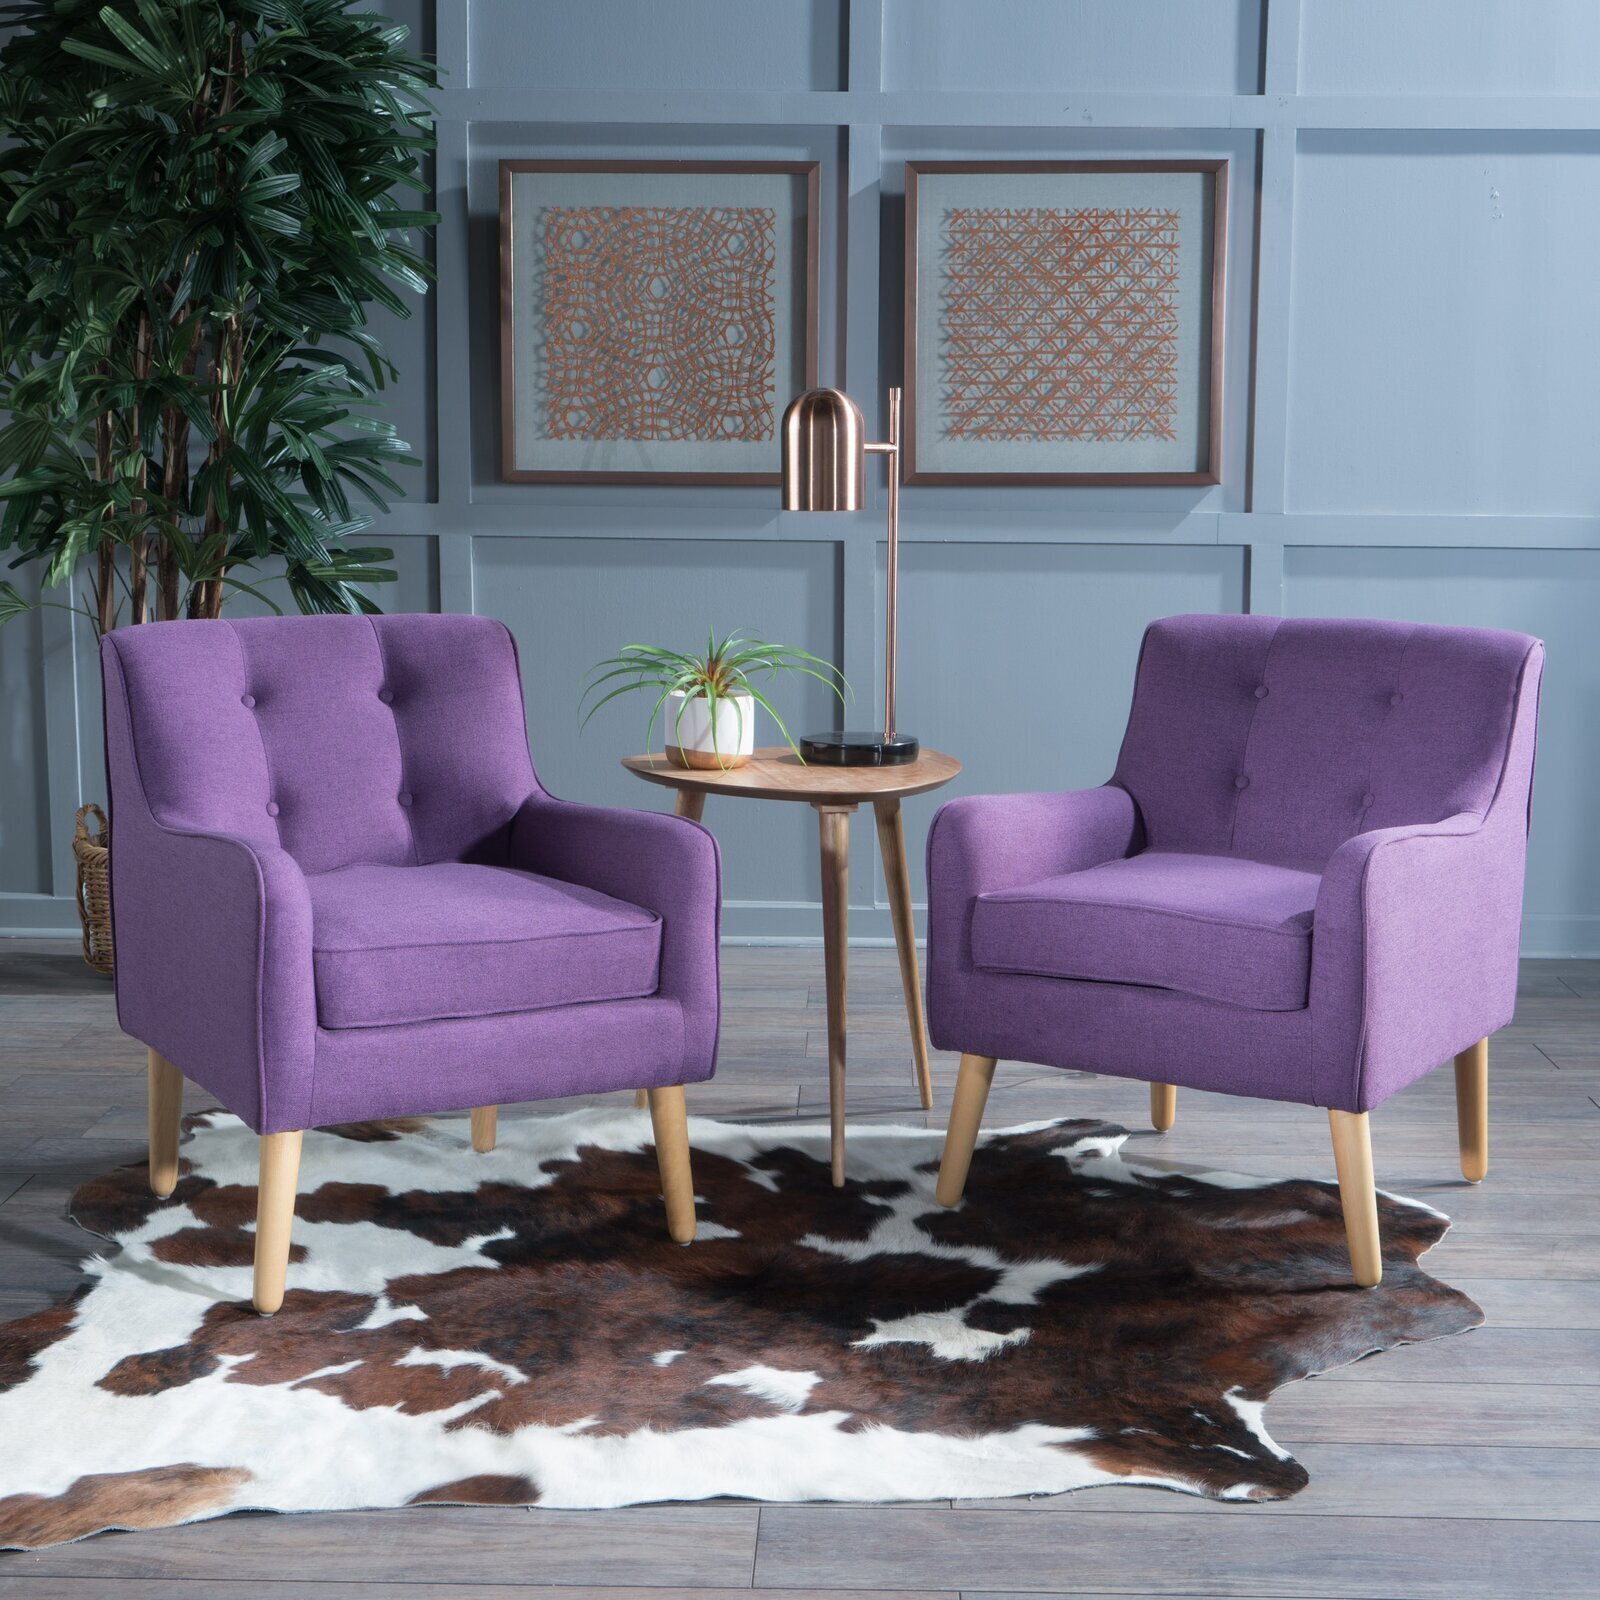 Set of Two Square Light Purple Armchairs